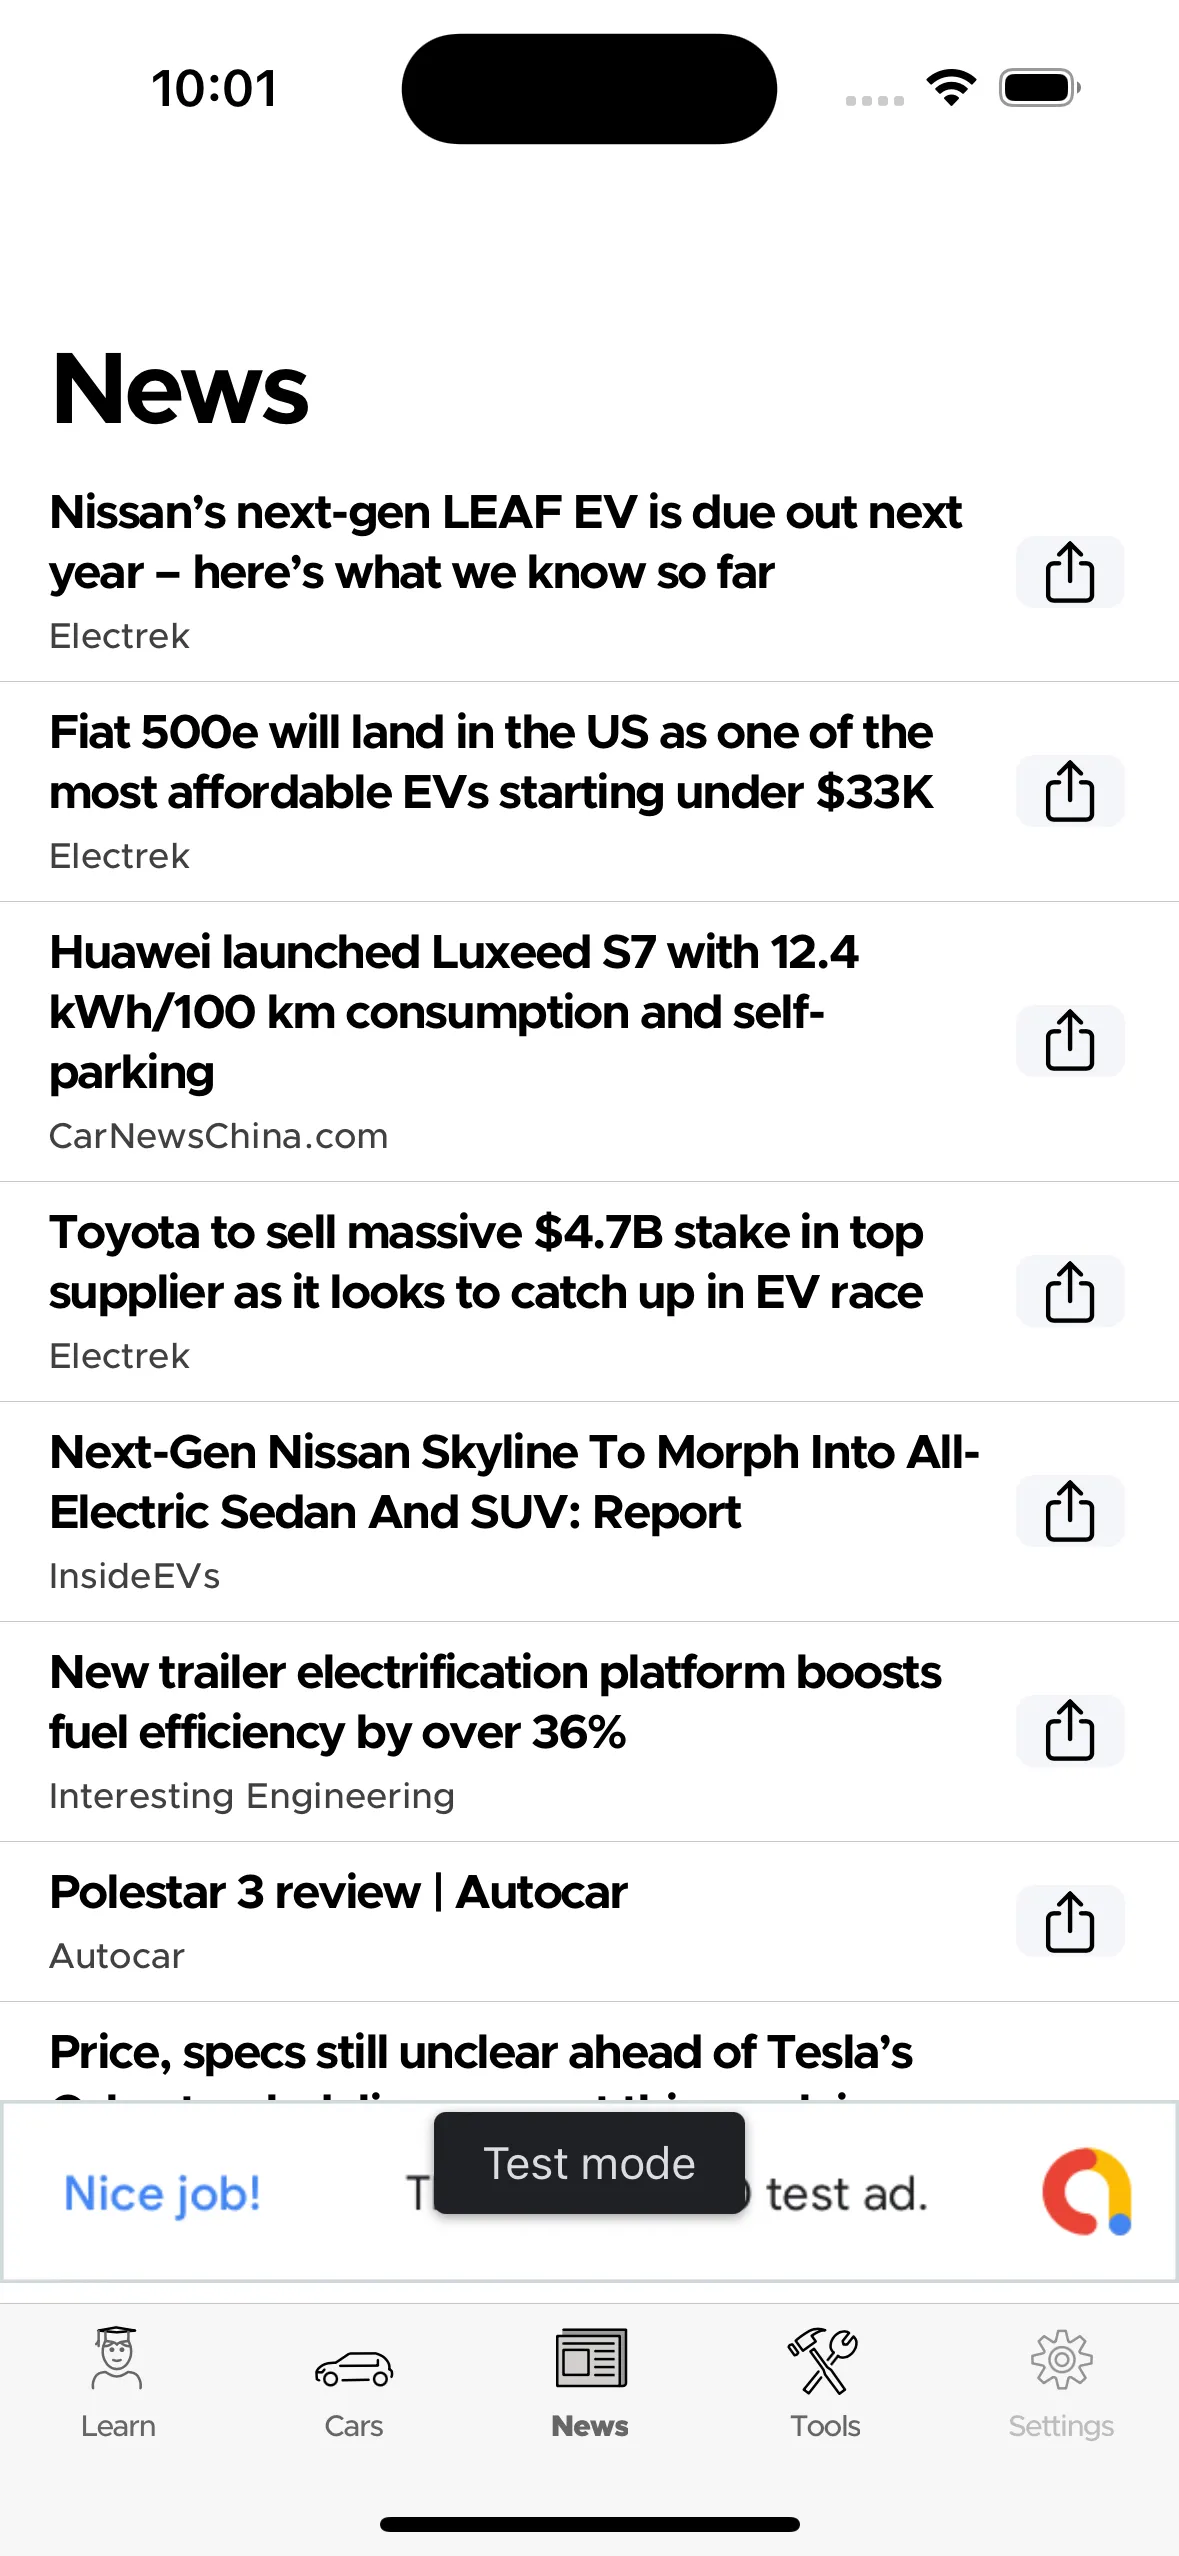 News section of the Hello EV app showing latest articles on electric vehicles from various sources like Electrek and InsideEVs, featuring updates on models such as Nissan LEAF and Fisker Ocean.